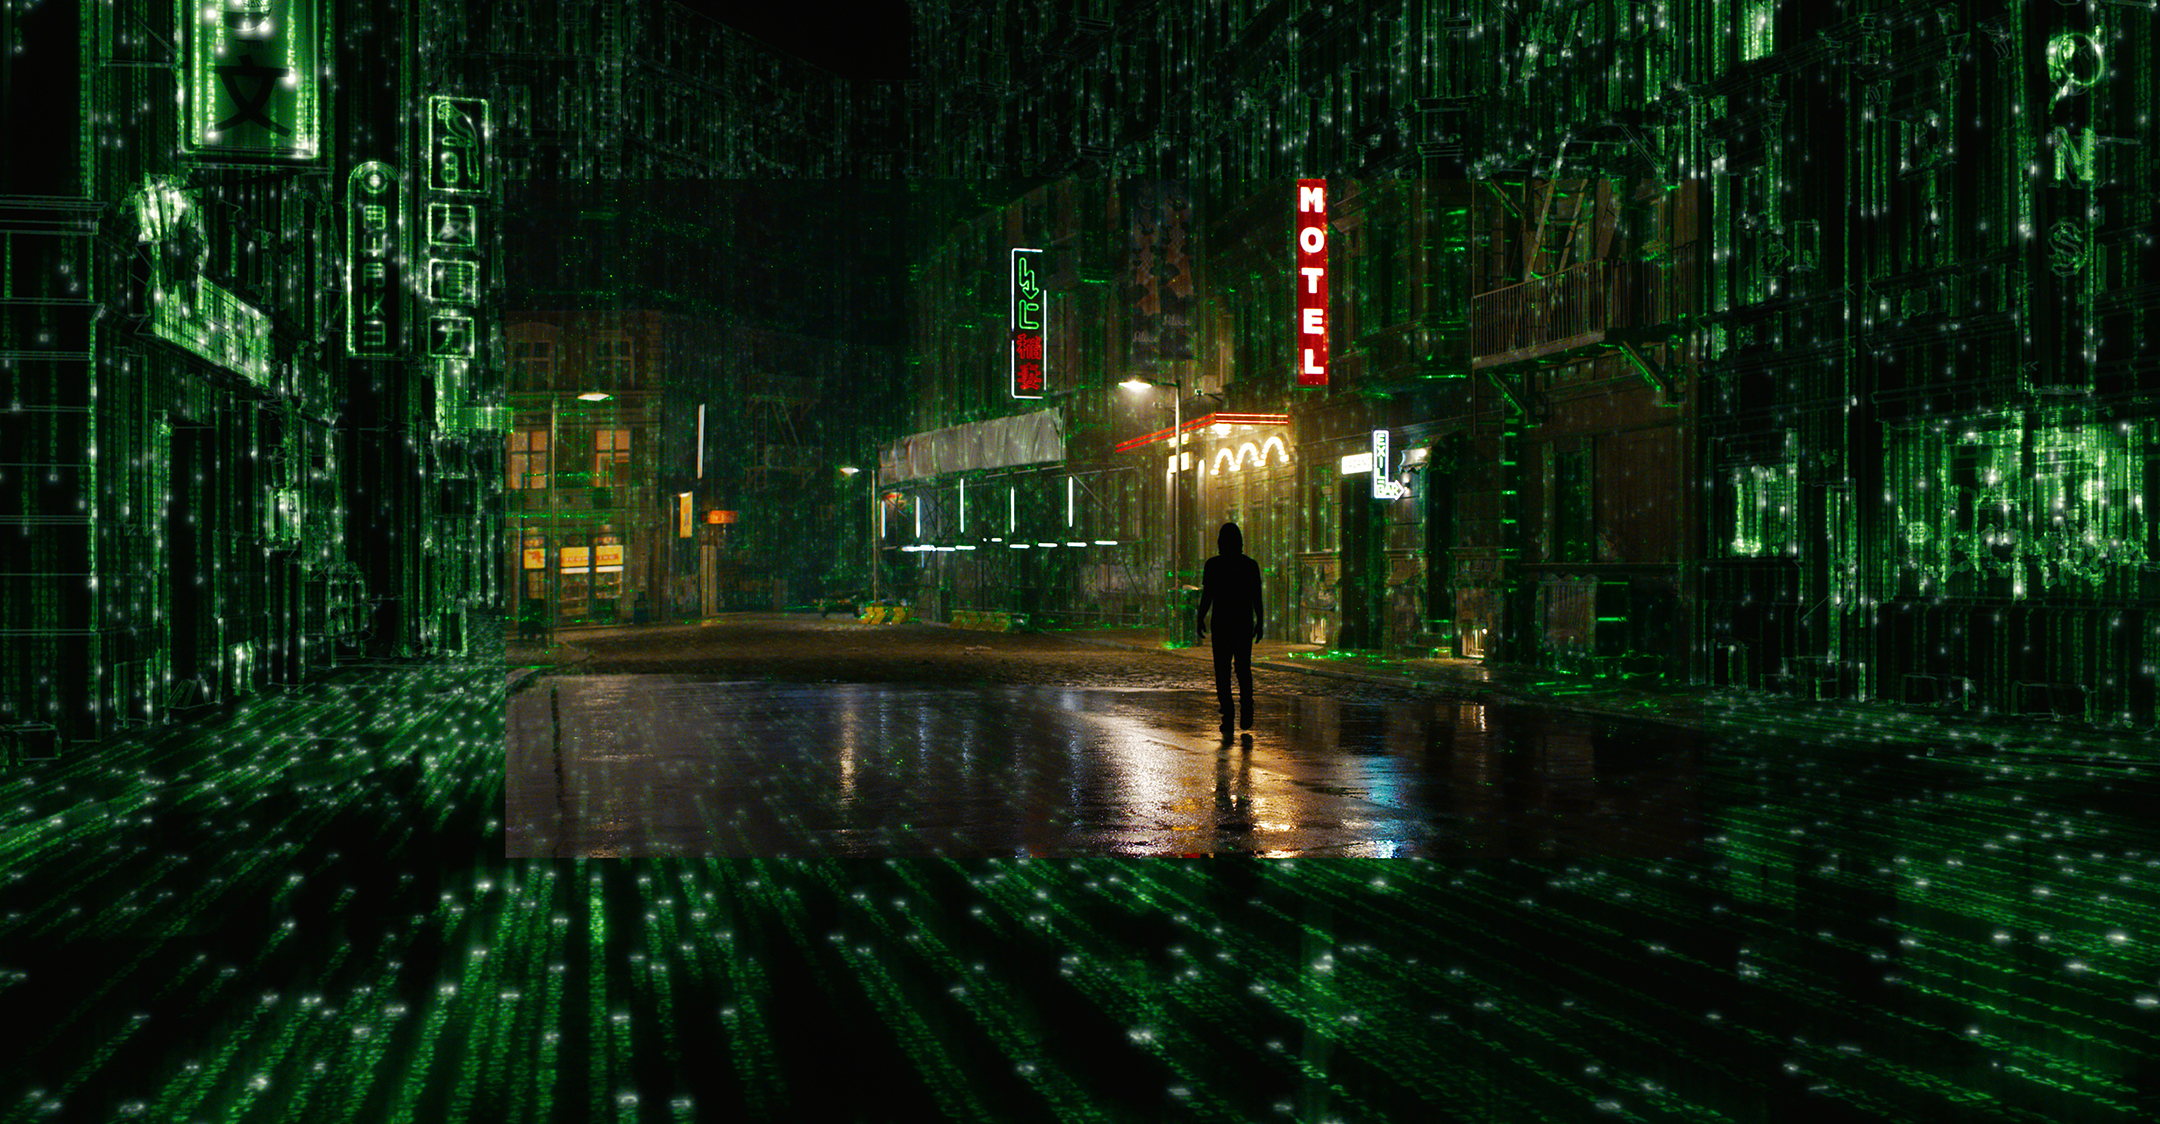 Still from The Matrix Resurrections depicting a man walking through a city street rendered in green computer code